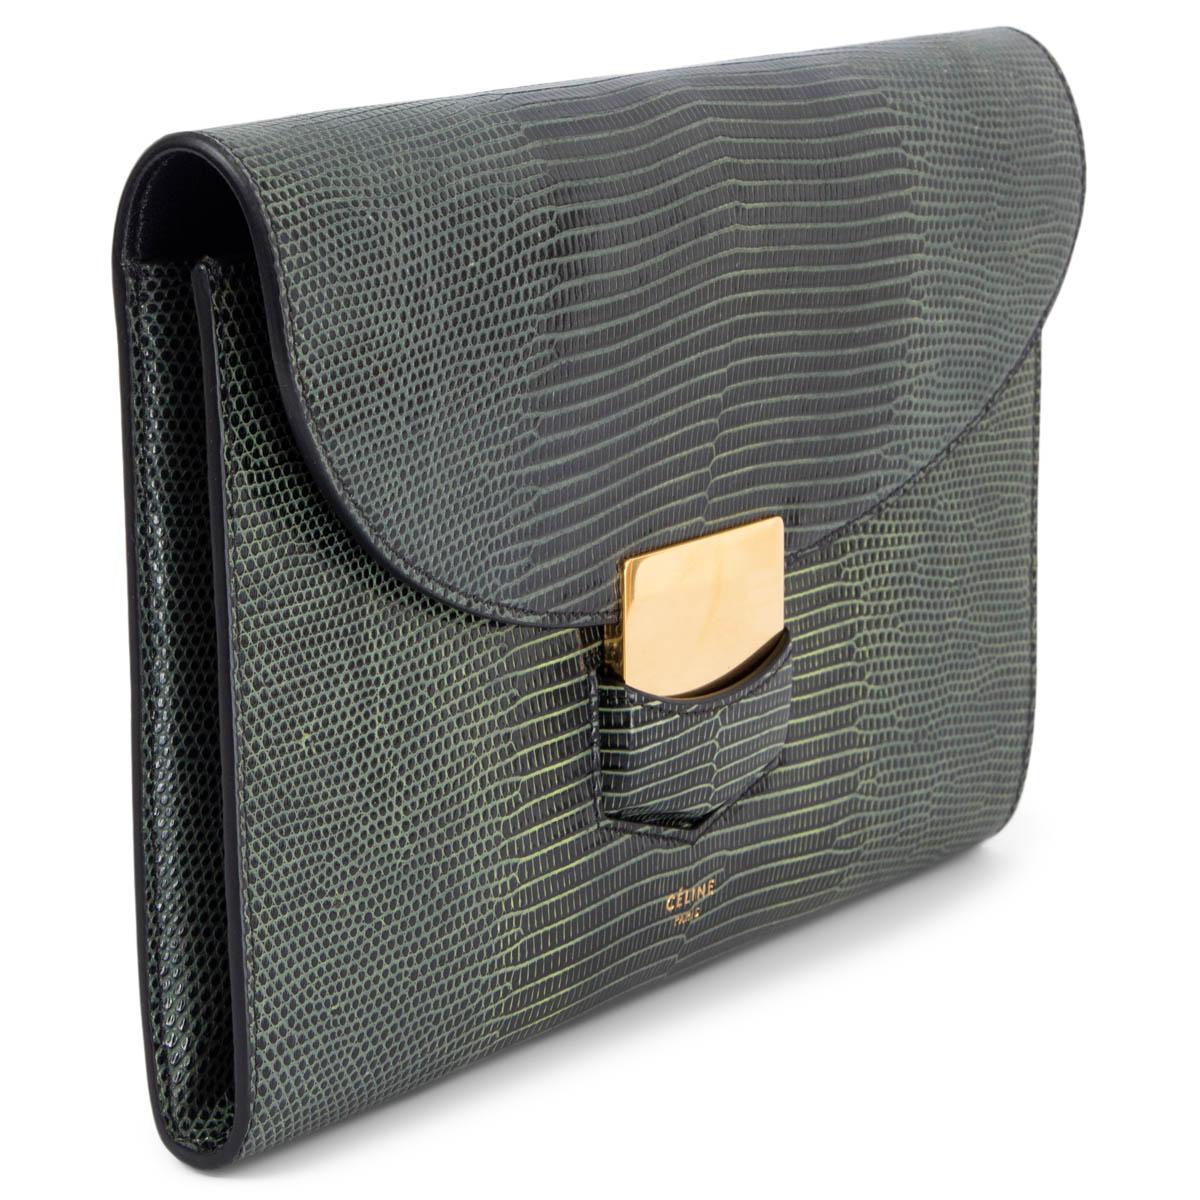 100% authentic Céline Trotteur flap clutch in pale petrol, olive green and black lizard featuring gold-tone metal clasp. Lined in black lambskin with three credit card slots against the back and an open pocket against the front. Has been carried and